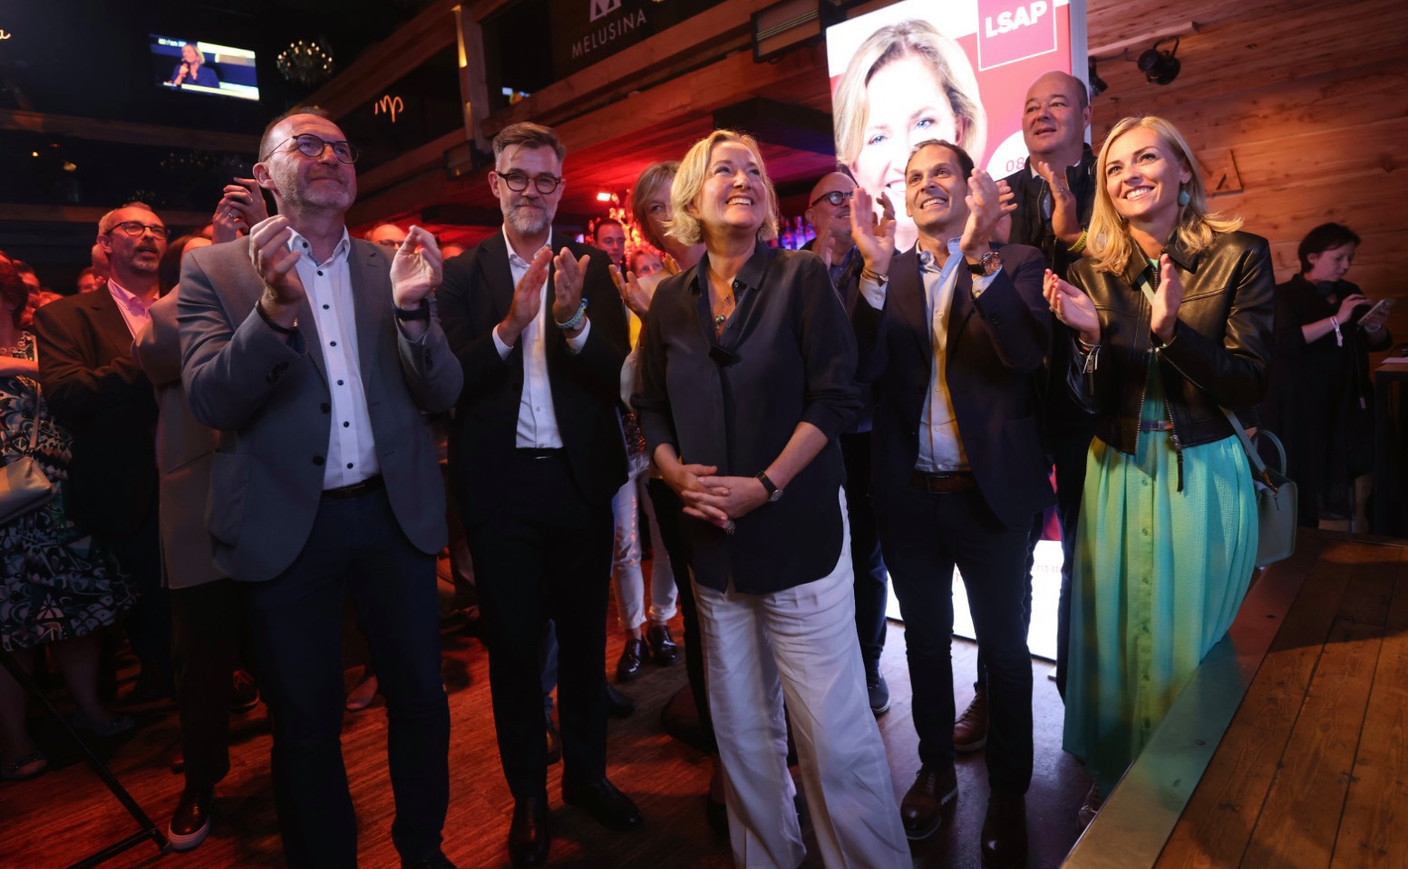 At the LSAP’s election night headquarters at Melusina. From left to right: Georges Engel, Franz Fayot, Paulette Lenert, Dan Biancalana, Claude Haagen and Taina Bofferding. Photo: Guy Wolff/Maison Moderne